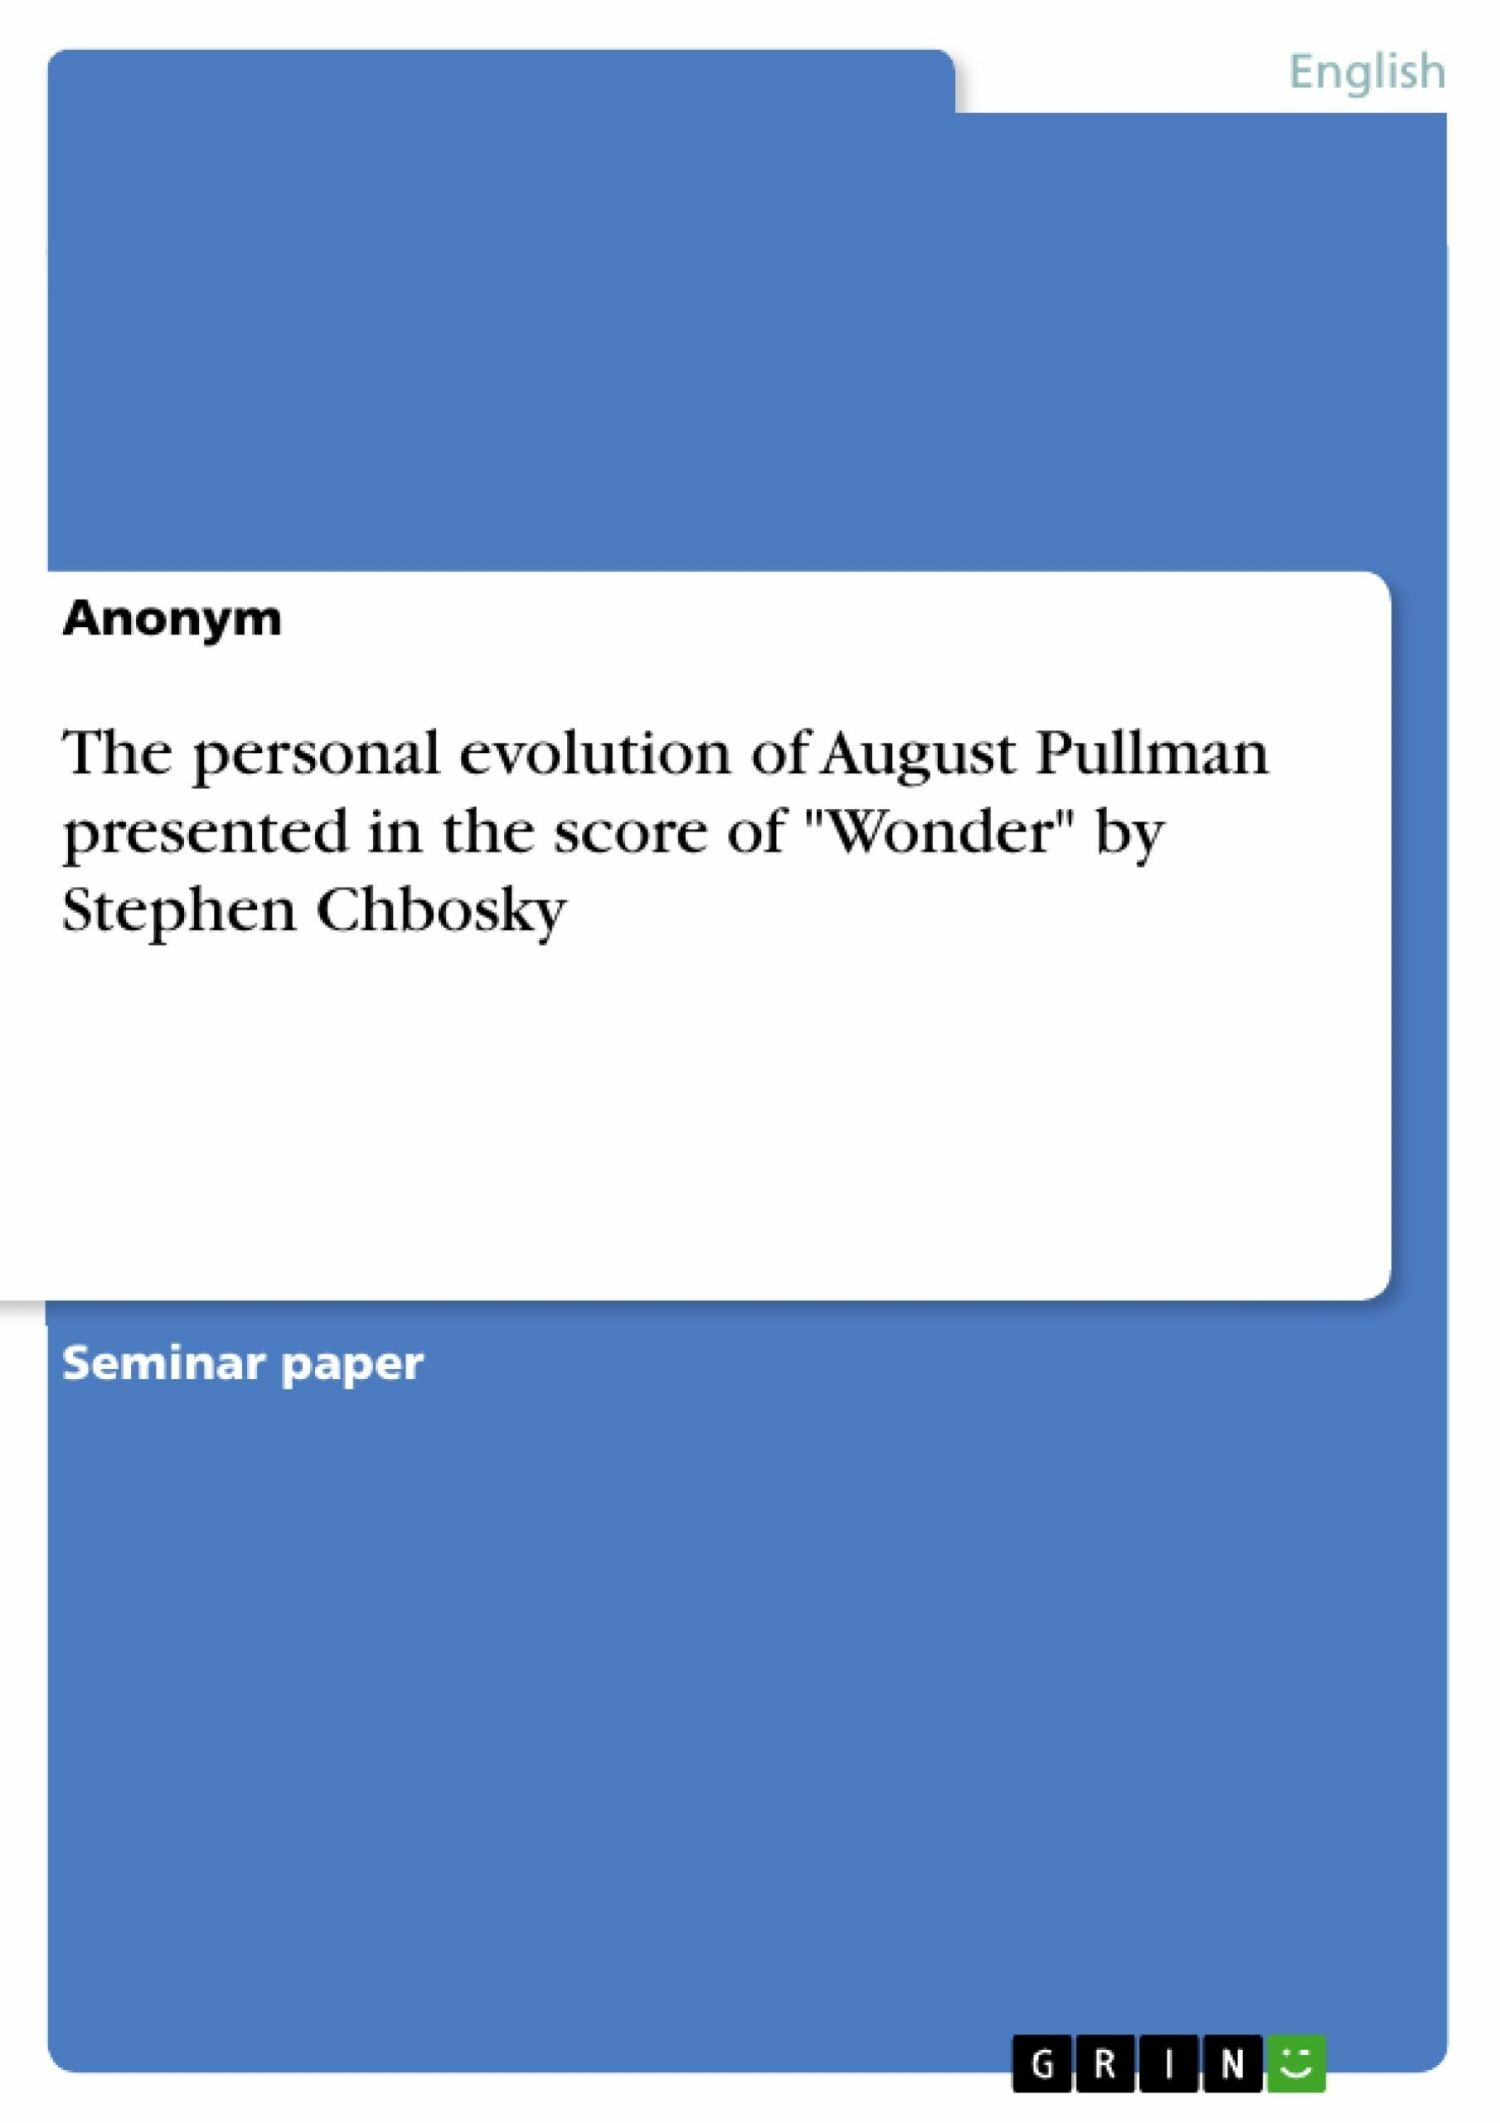 The personal evolution of August Pullman presented in the score of 'Wonder' by Stephen Chbosky